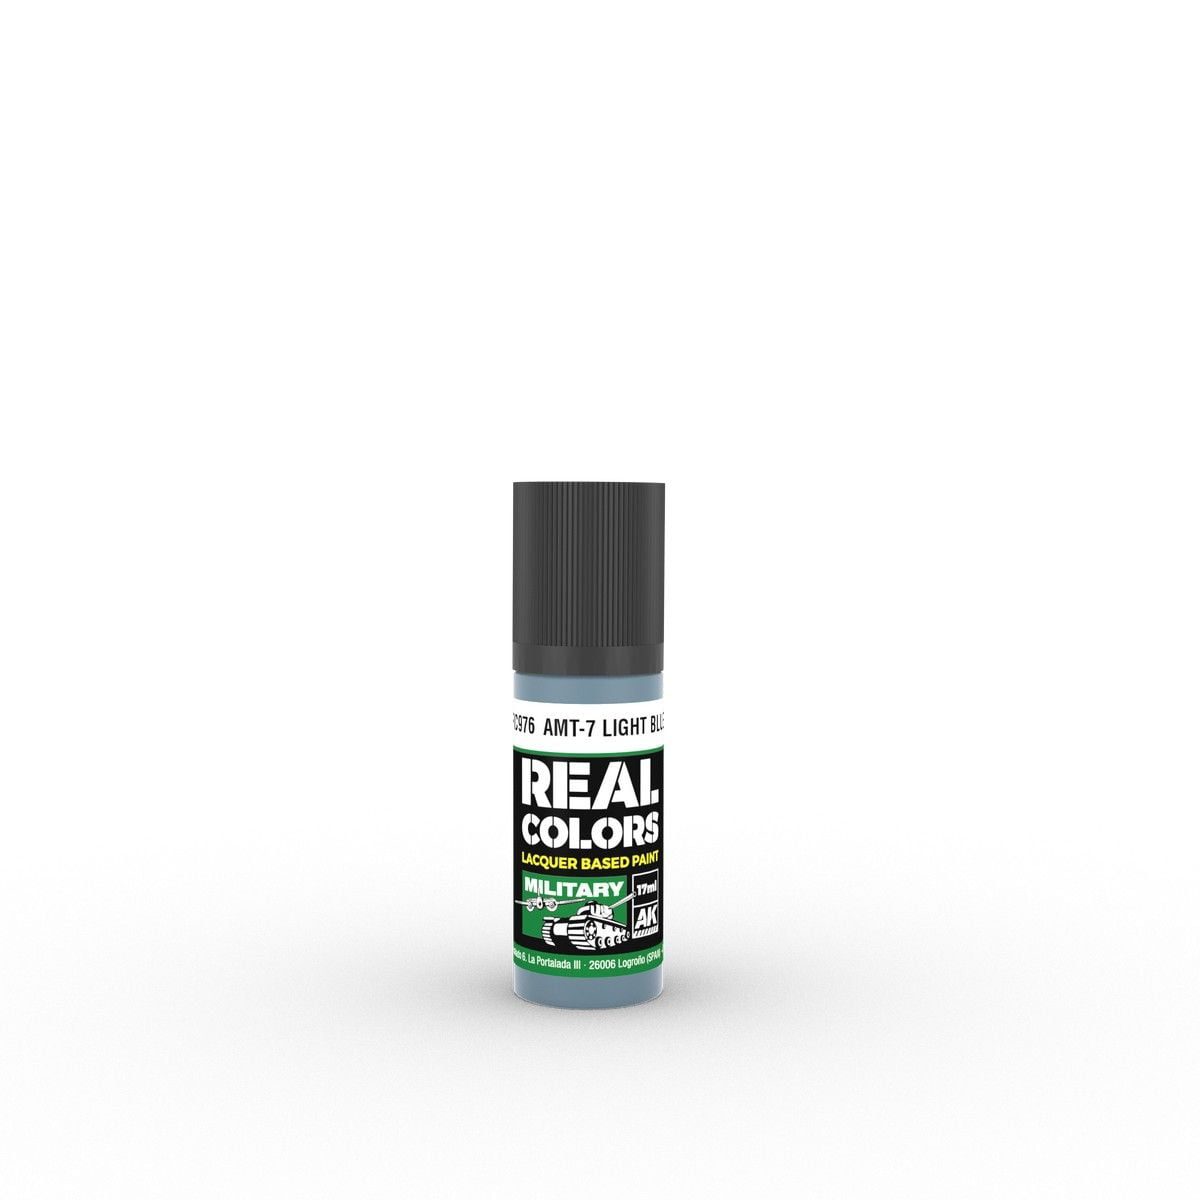 Real Colors Military: AMT-7 Light Blue 17ml